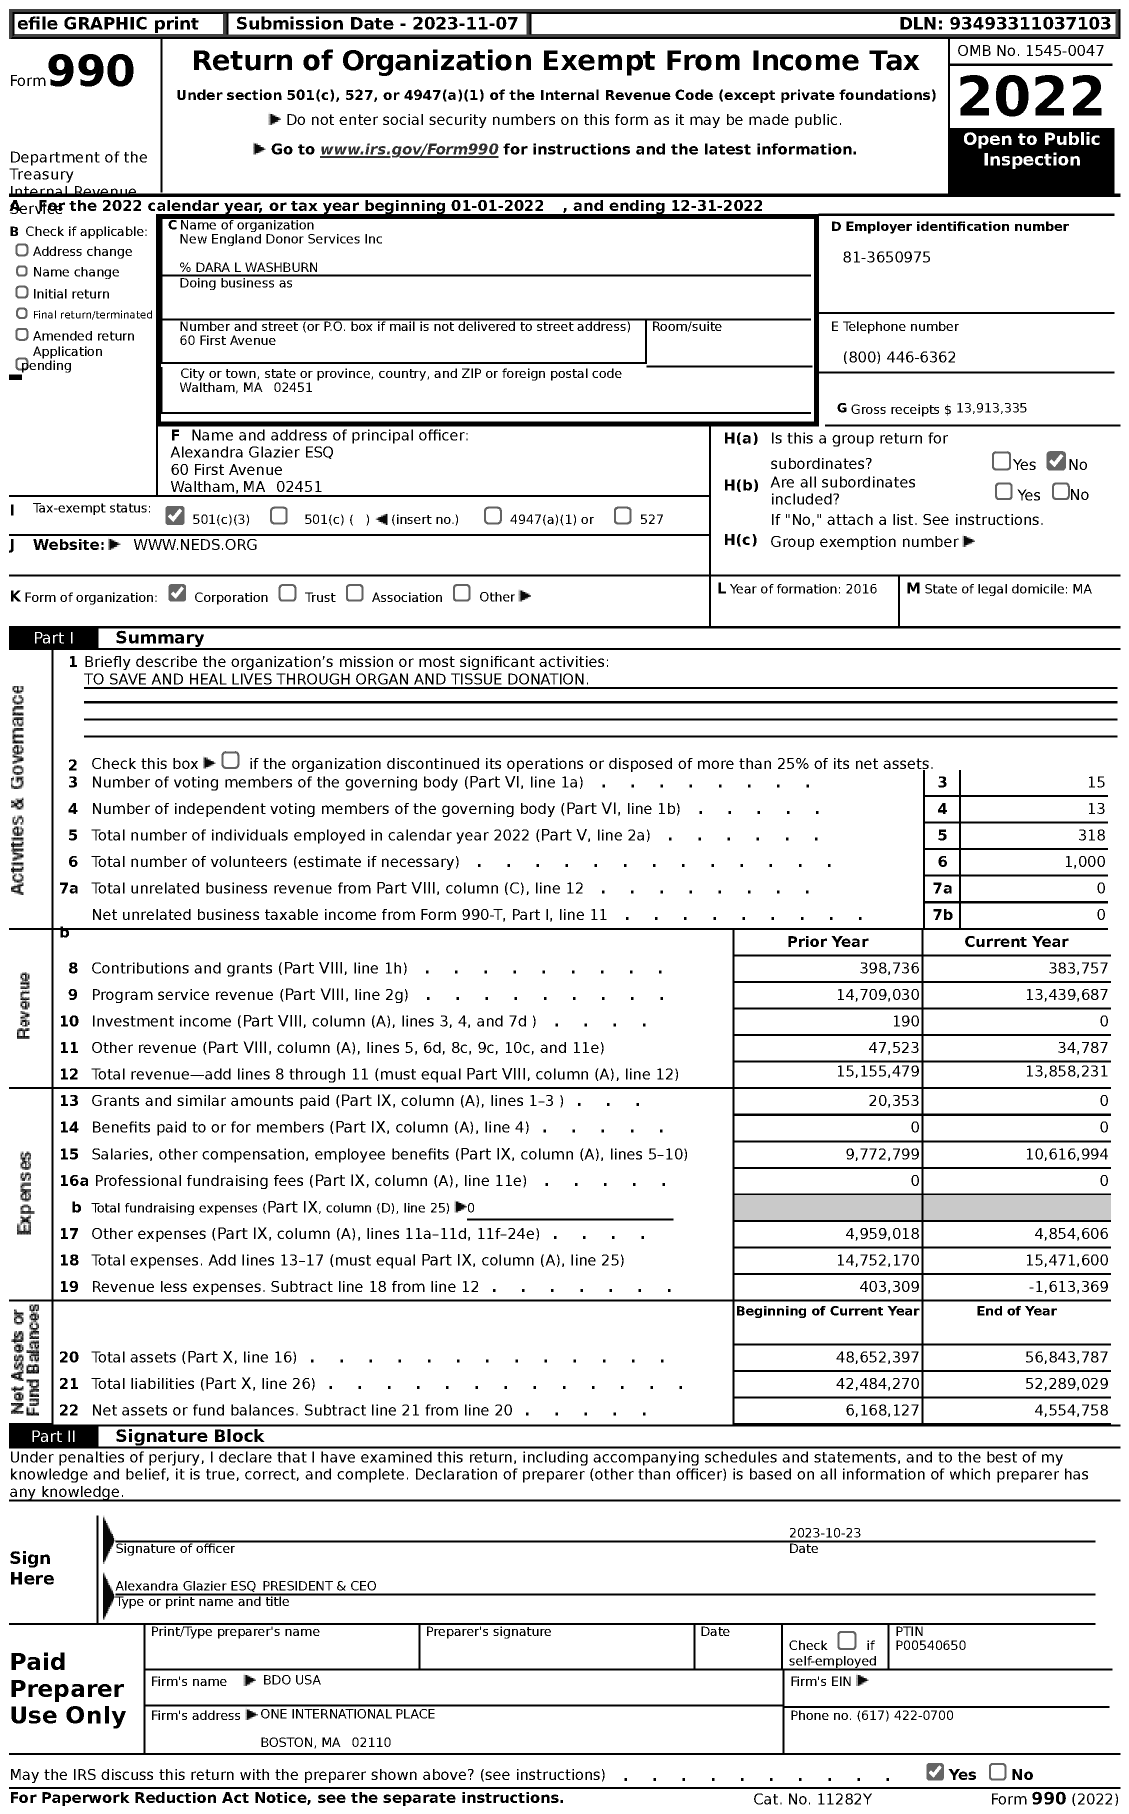 Image of first page of 2022 Form 990 for New England Donor Services